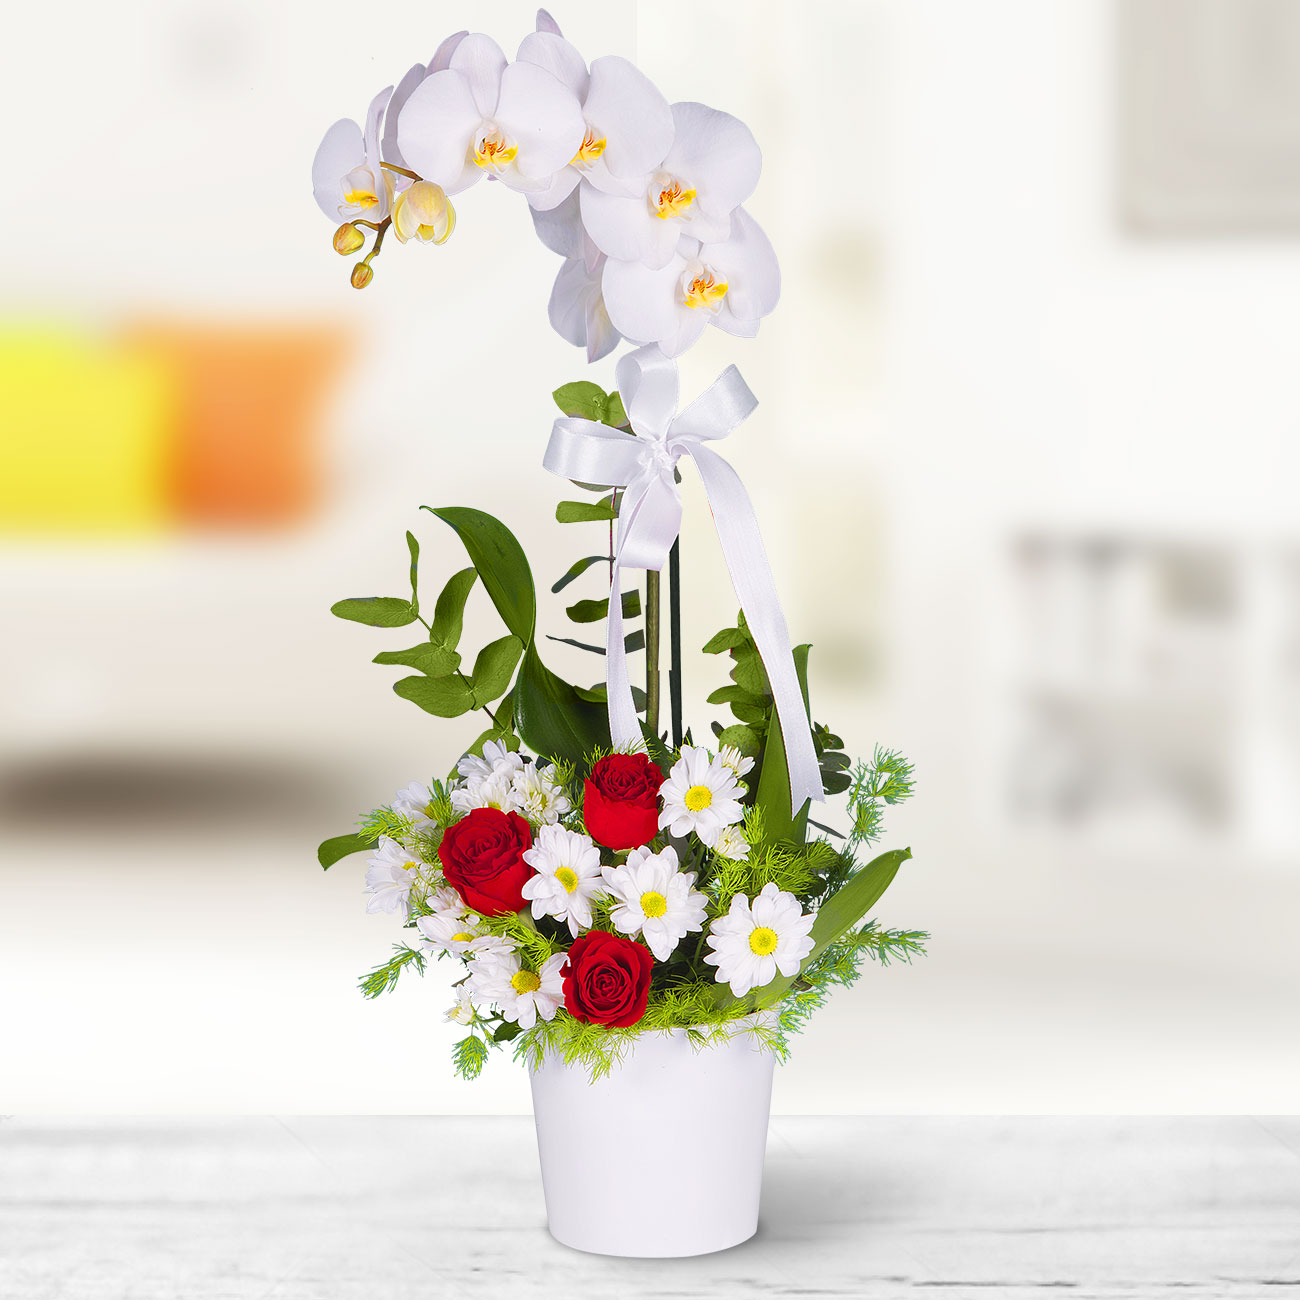 Send flowers Turkey, White Orchid and Arrangement from 25USD